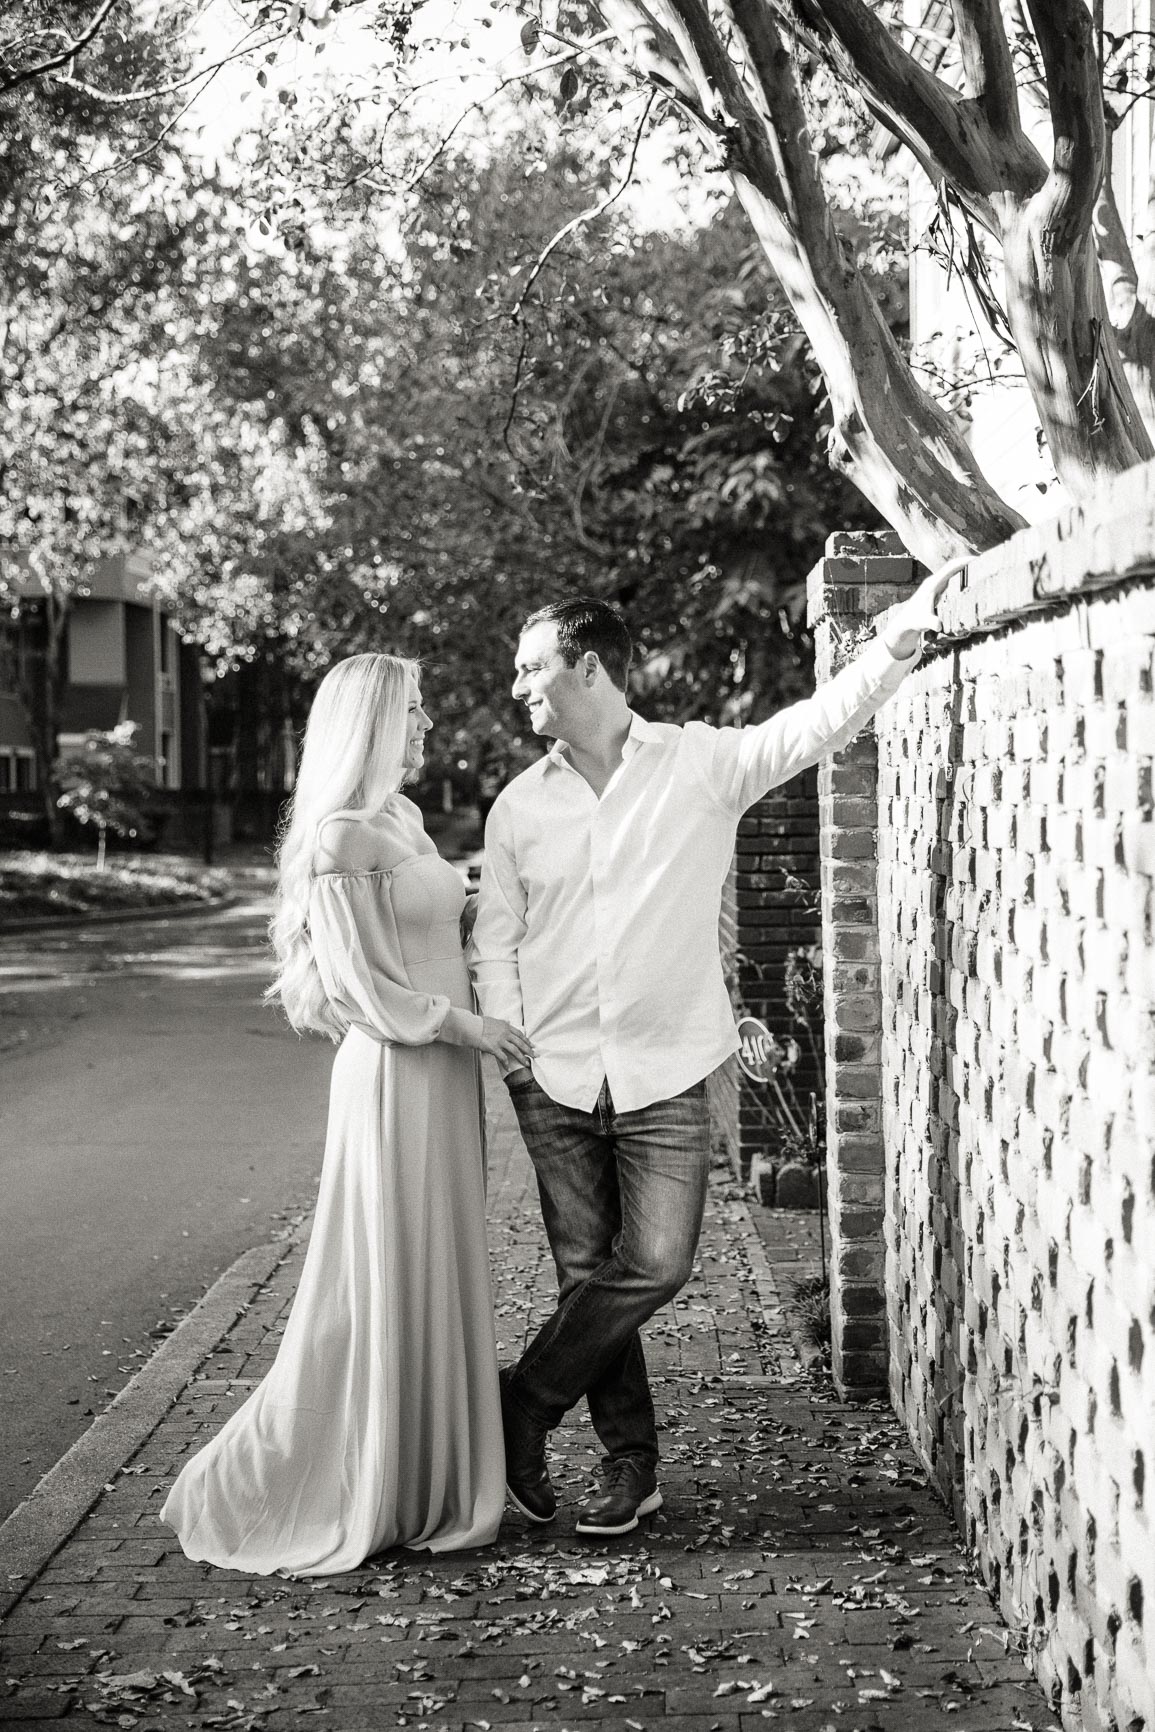 uptown's fourth ward engagement photo shot by Nhieu Tang Photography | nhieutang.com